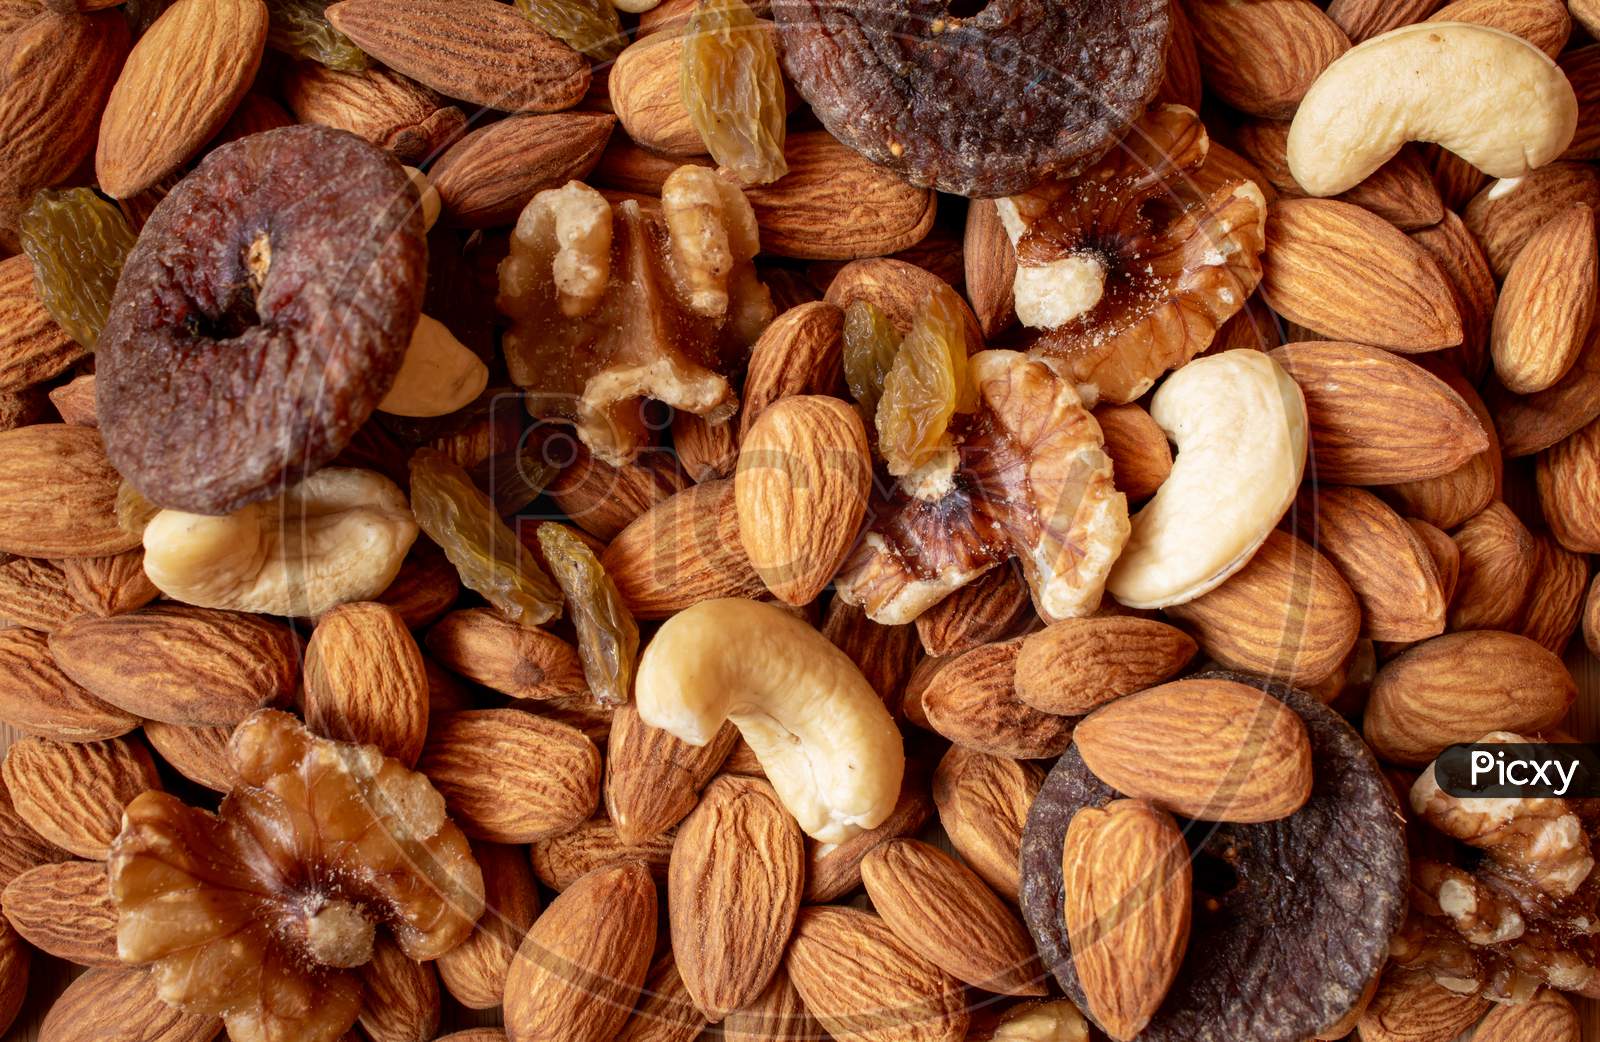 Mix Of Dry Fruits Containing Almonds, Walnuts, Raisins And Dried Figs. Healthy Food Concept